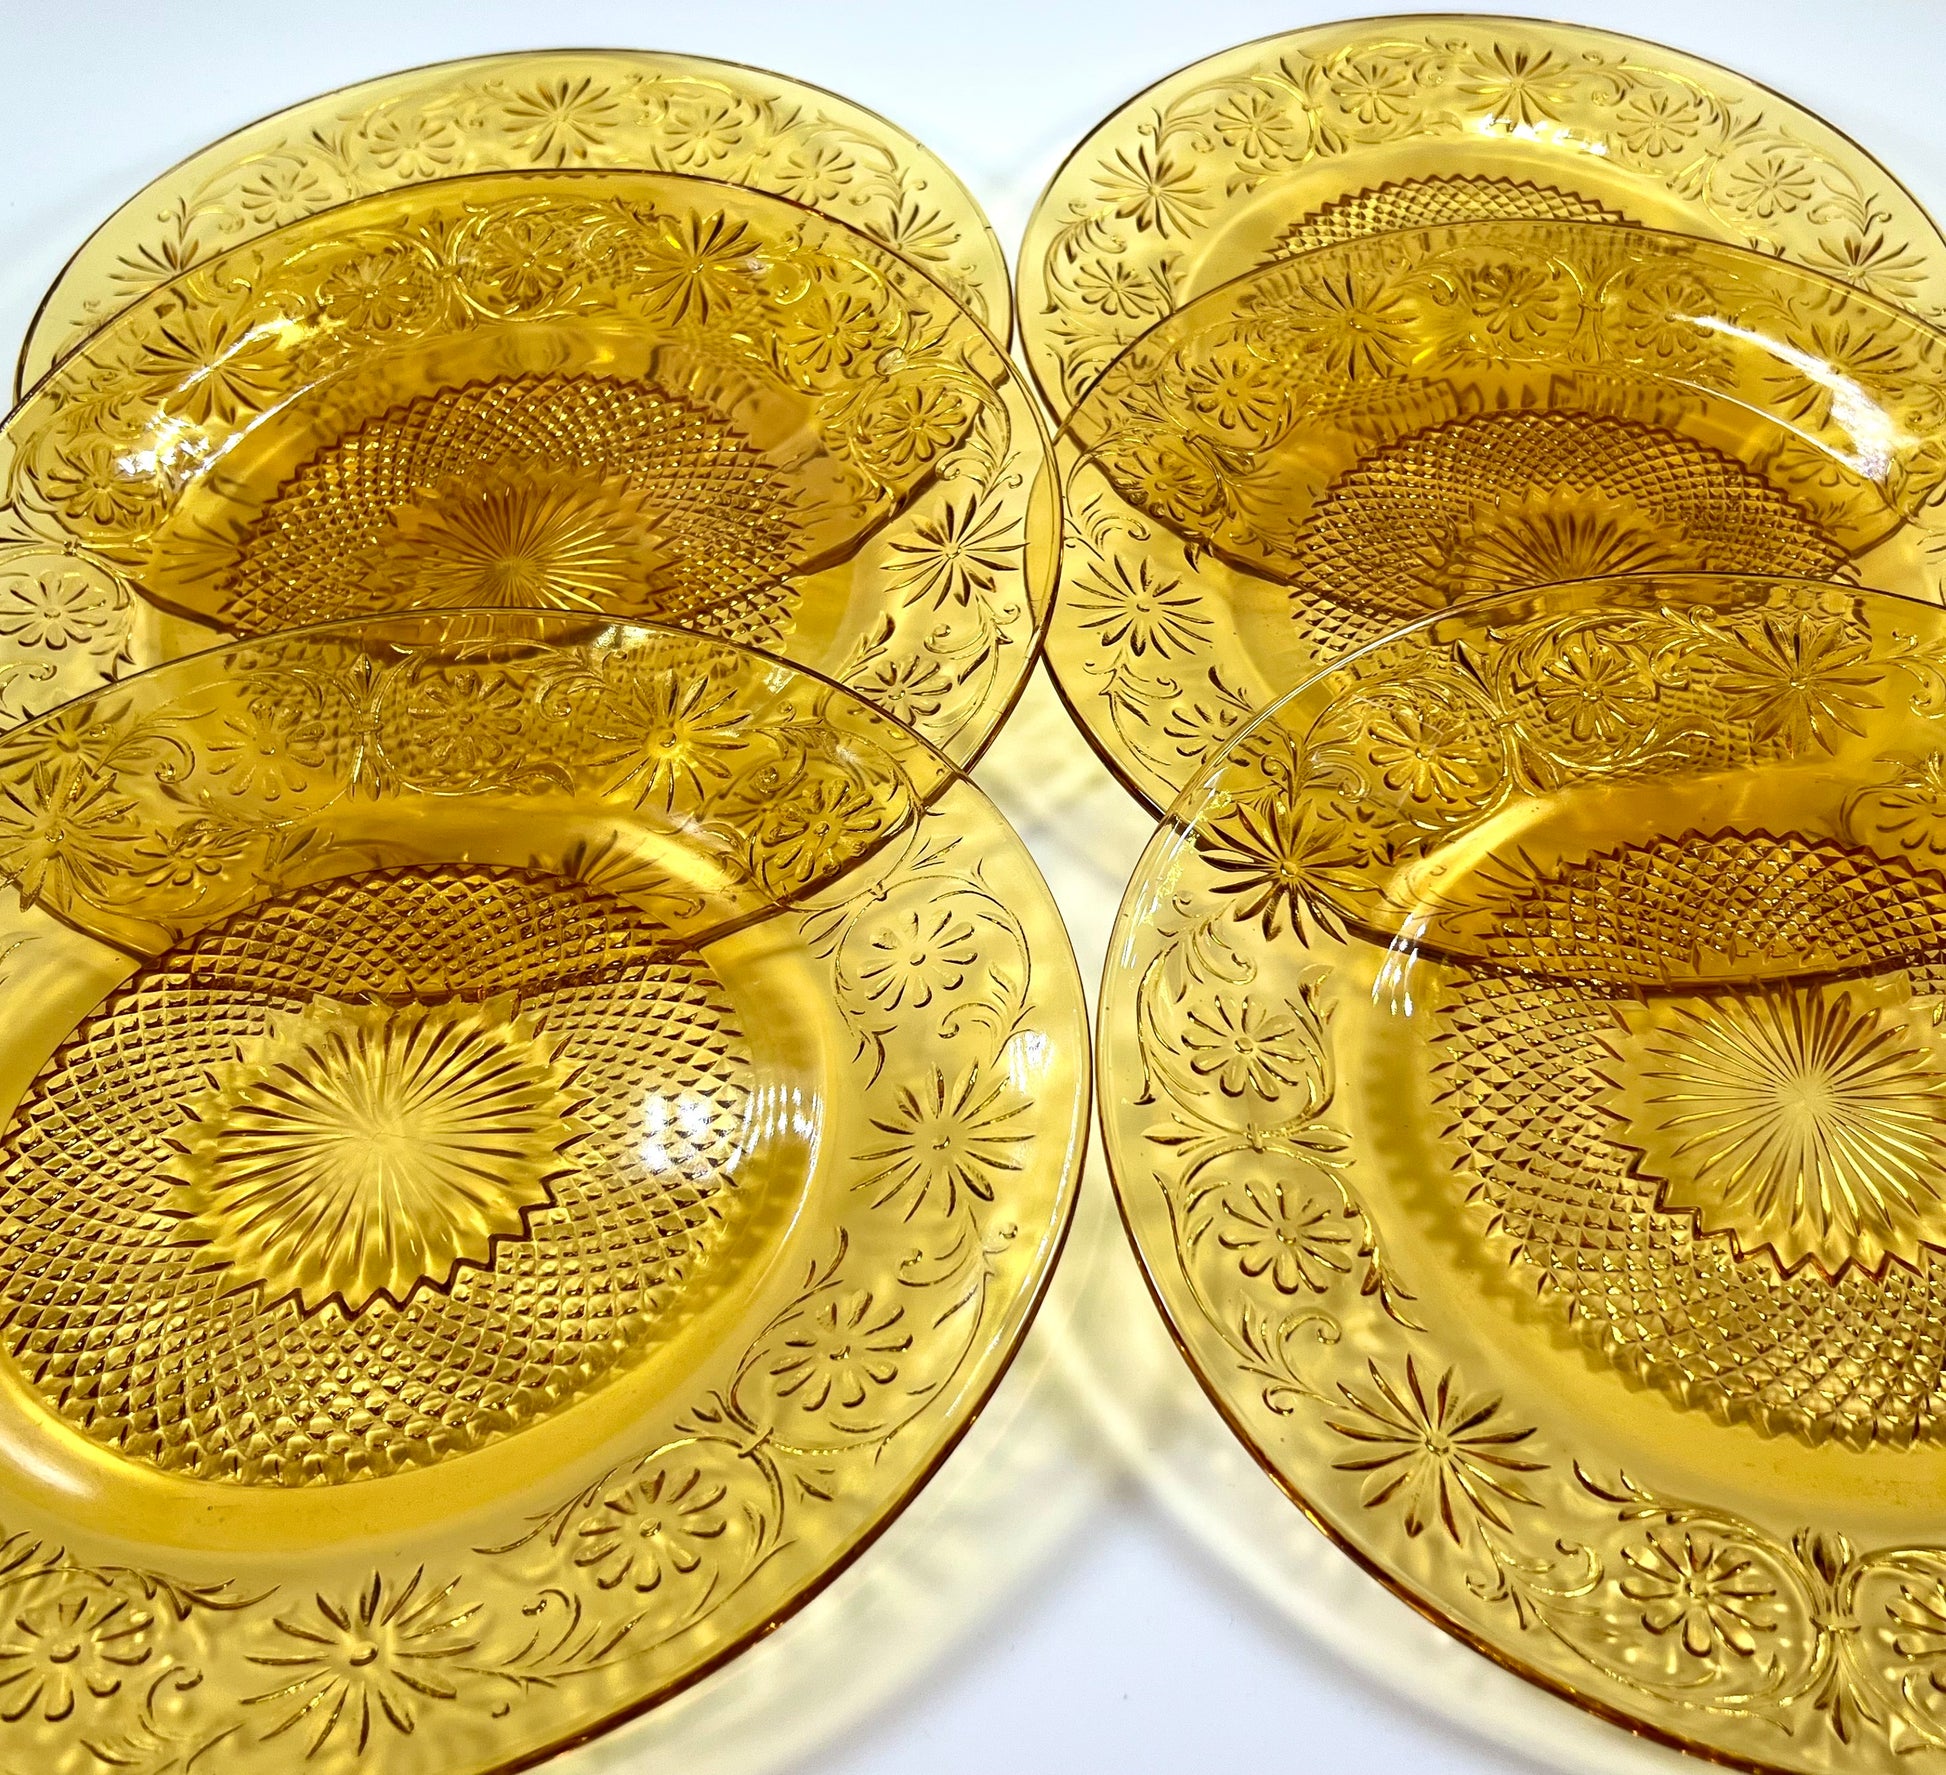 Vintage Amber Depression Glass Set In Daisy Pattern